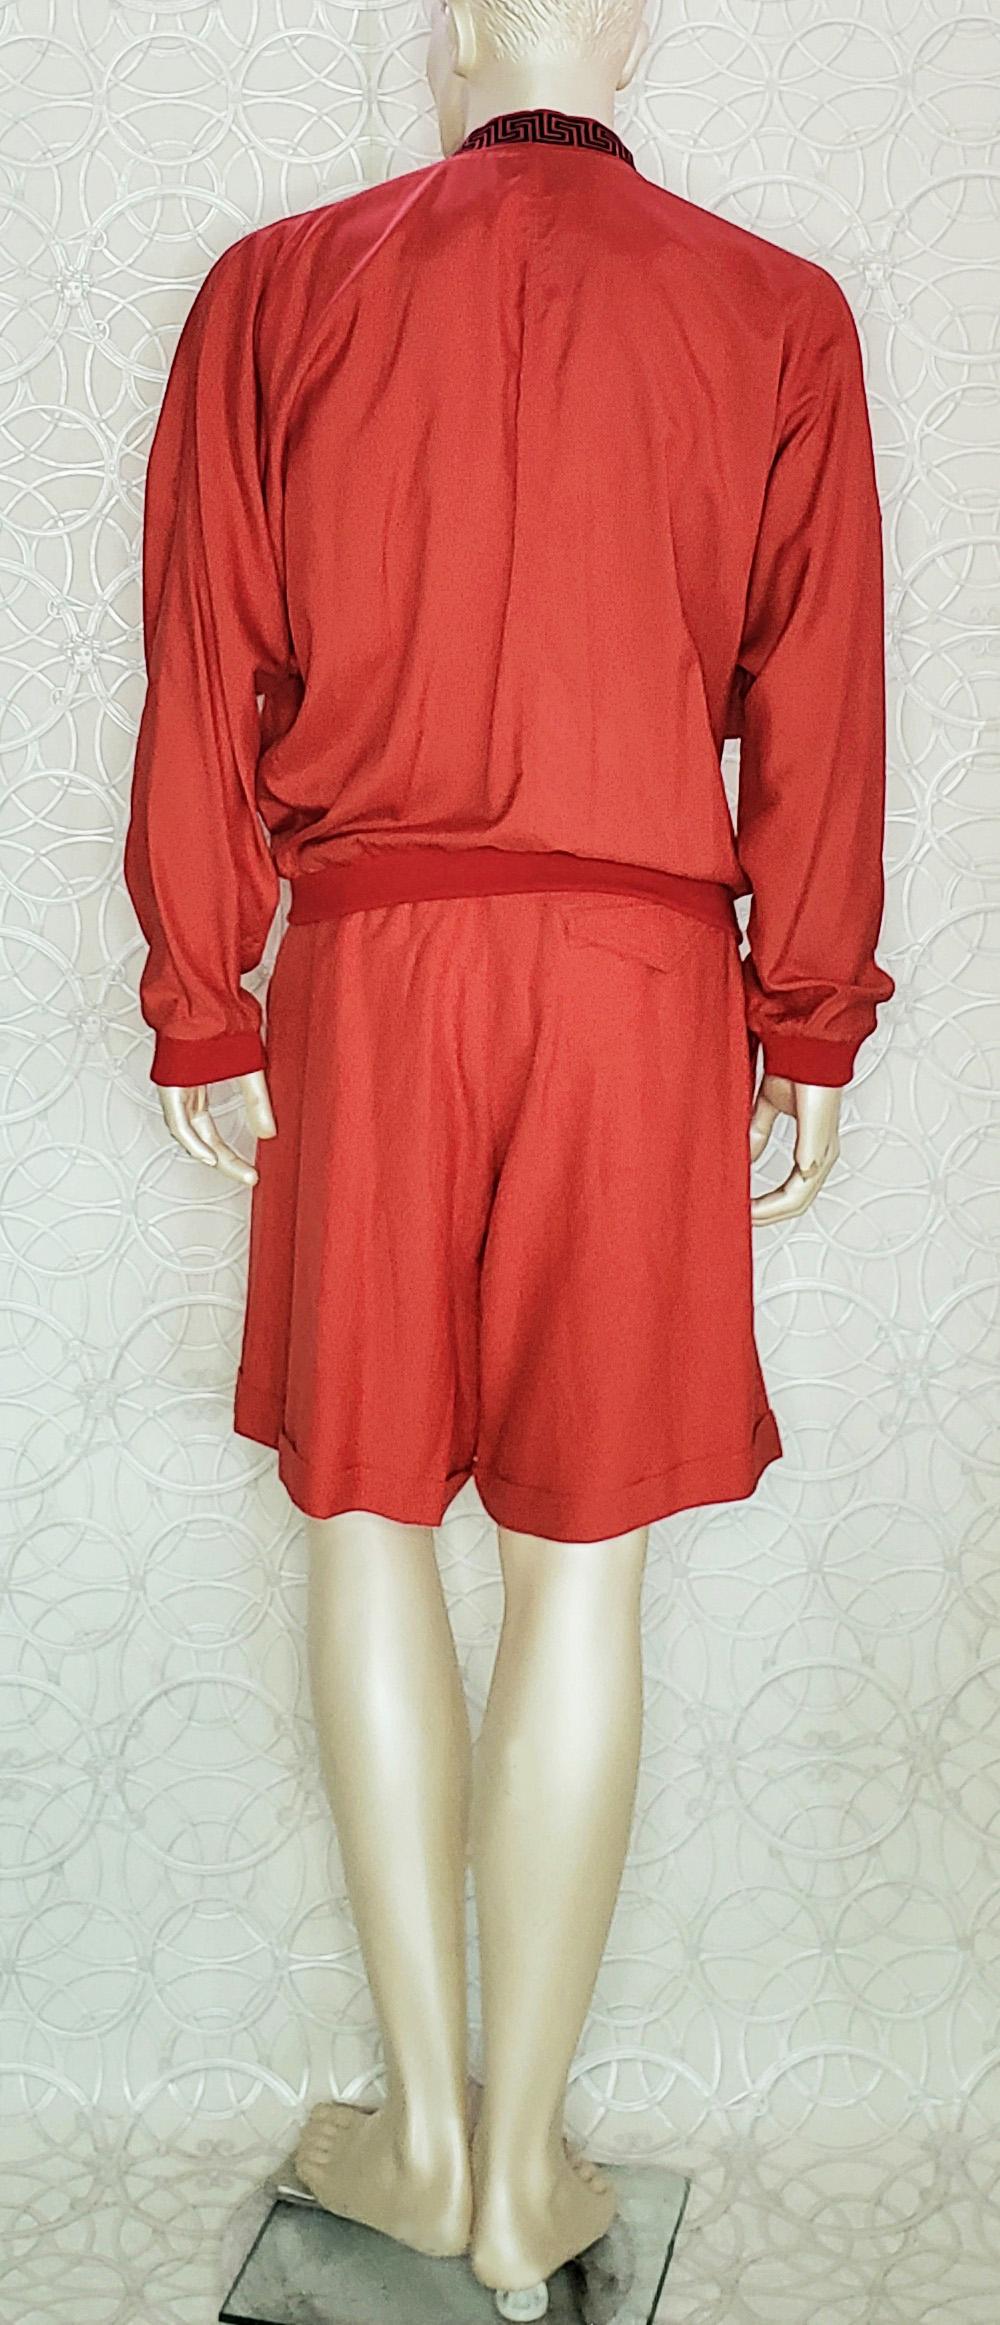 S/S 2012 VERSACE RED COTTON/LINEN GREEK KEY SHORTS Suit IT 48 - 38 (M) In New Condition For Sale In Montgomery, TX